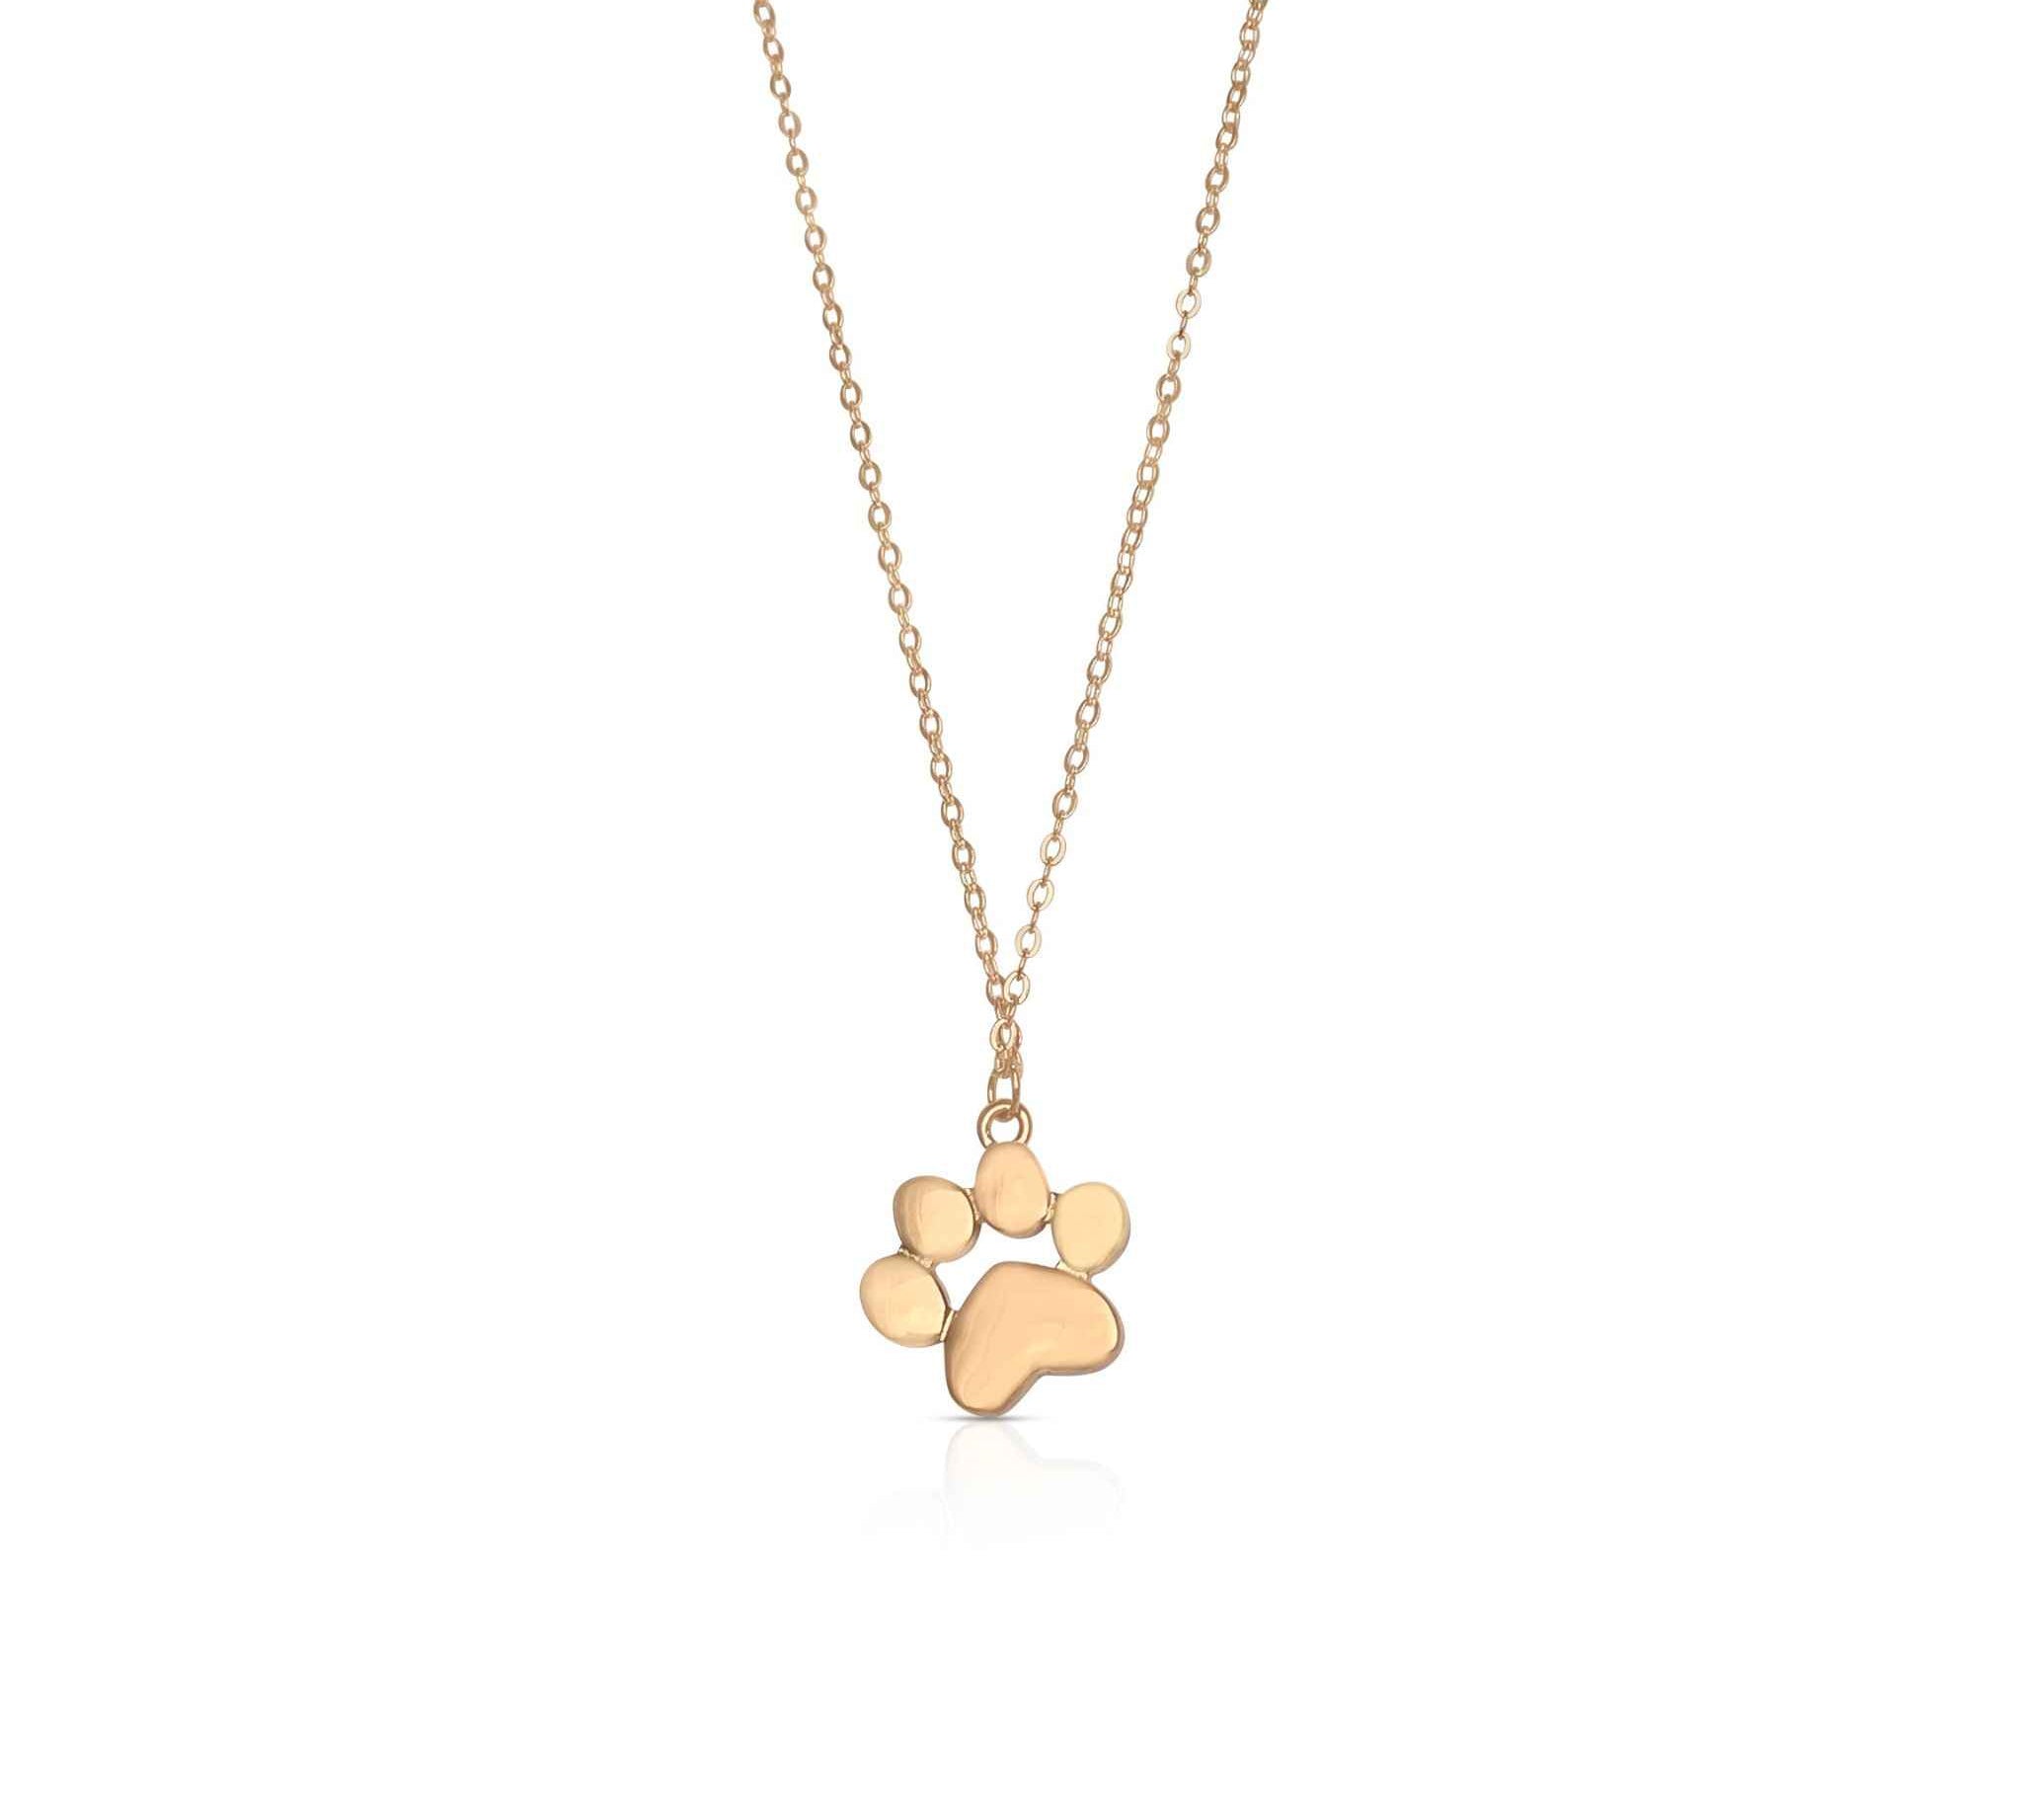 Fashionable Rose Gold Paw Print Jewelry - Ideal for Modern Pet Enthusiasts.